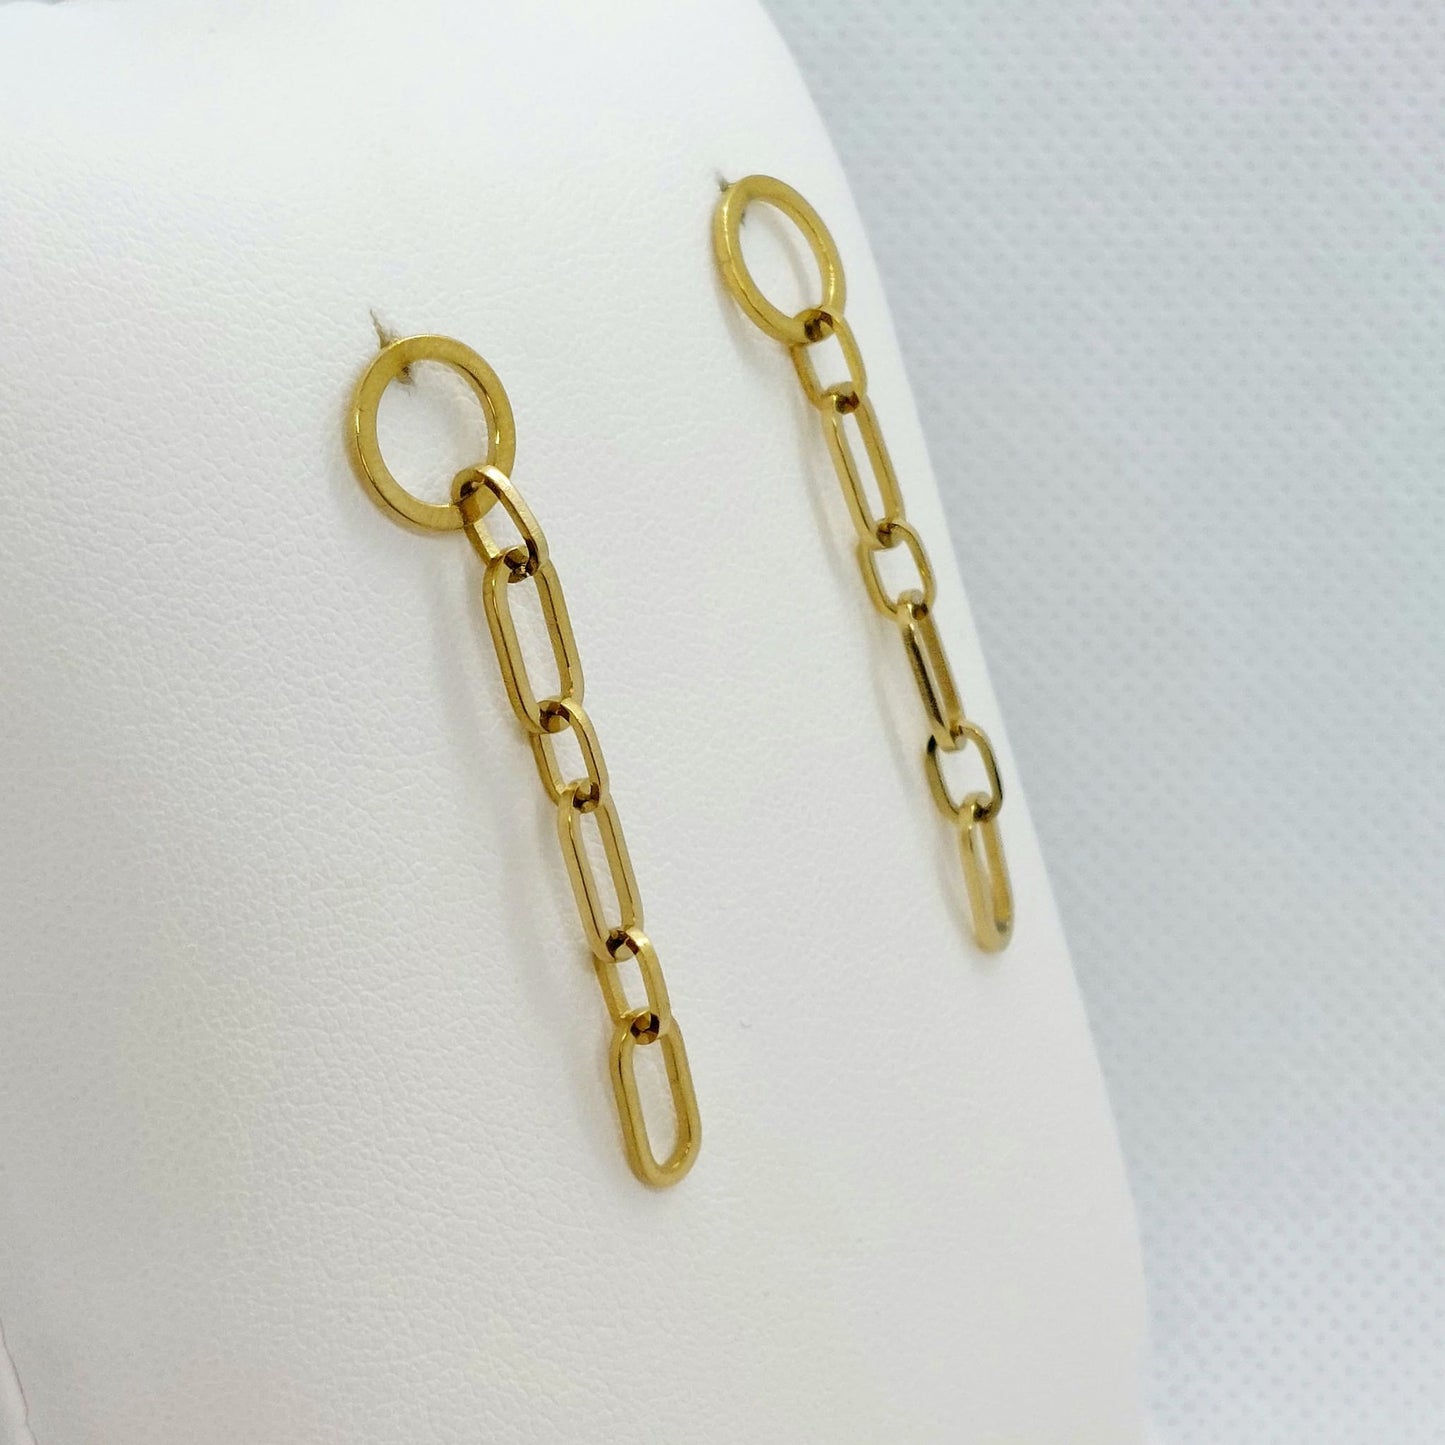 Stainless Steel Dangle Stud Earrings - Gold Plated